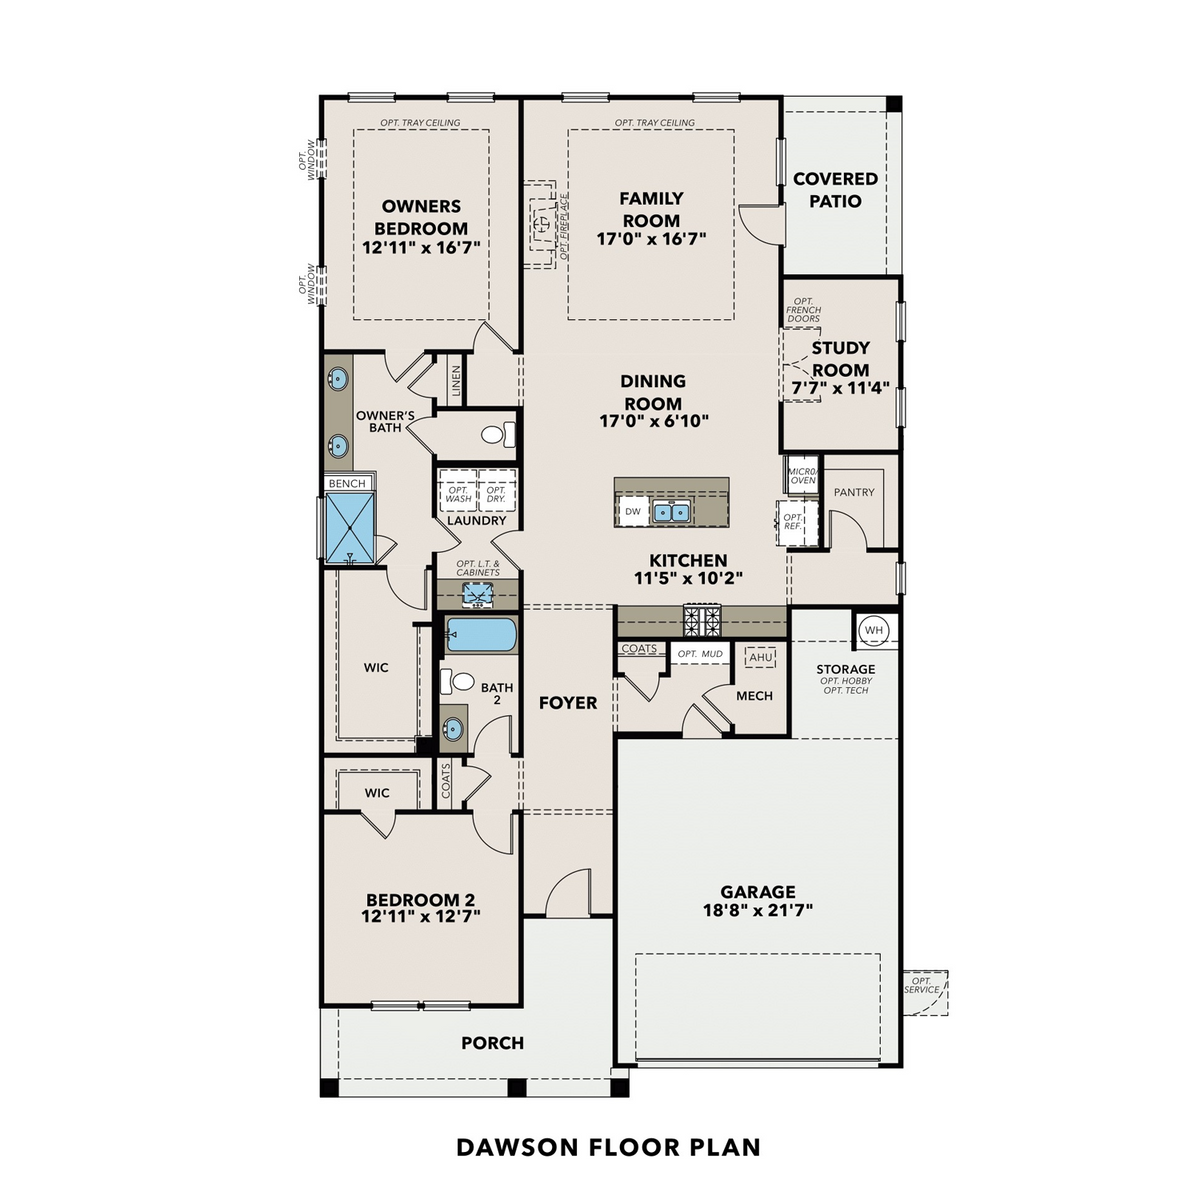 1 - The Dawson A buildable floor plan layout in Davidson Homes' Kelly Preserve community.